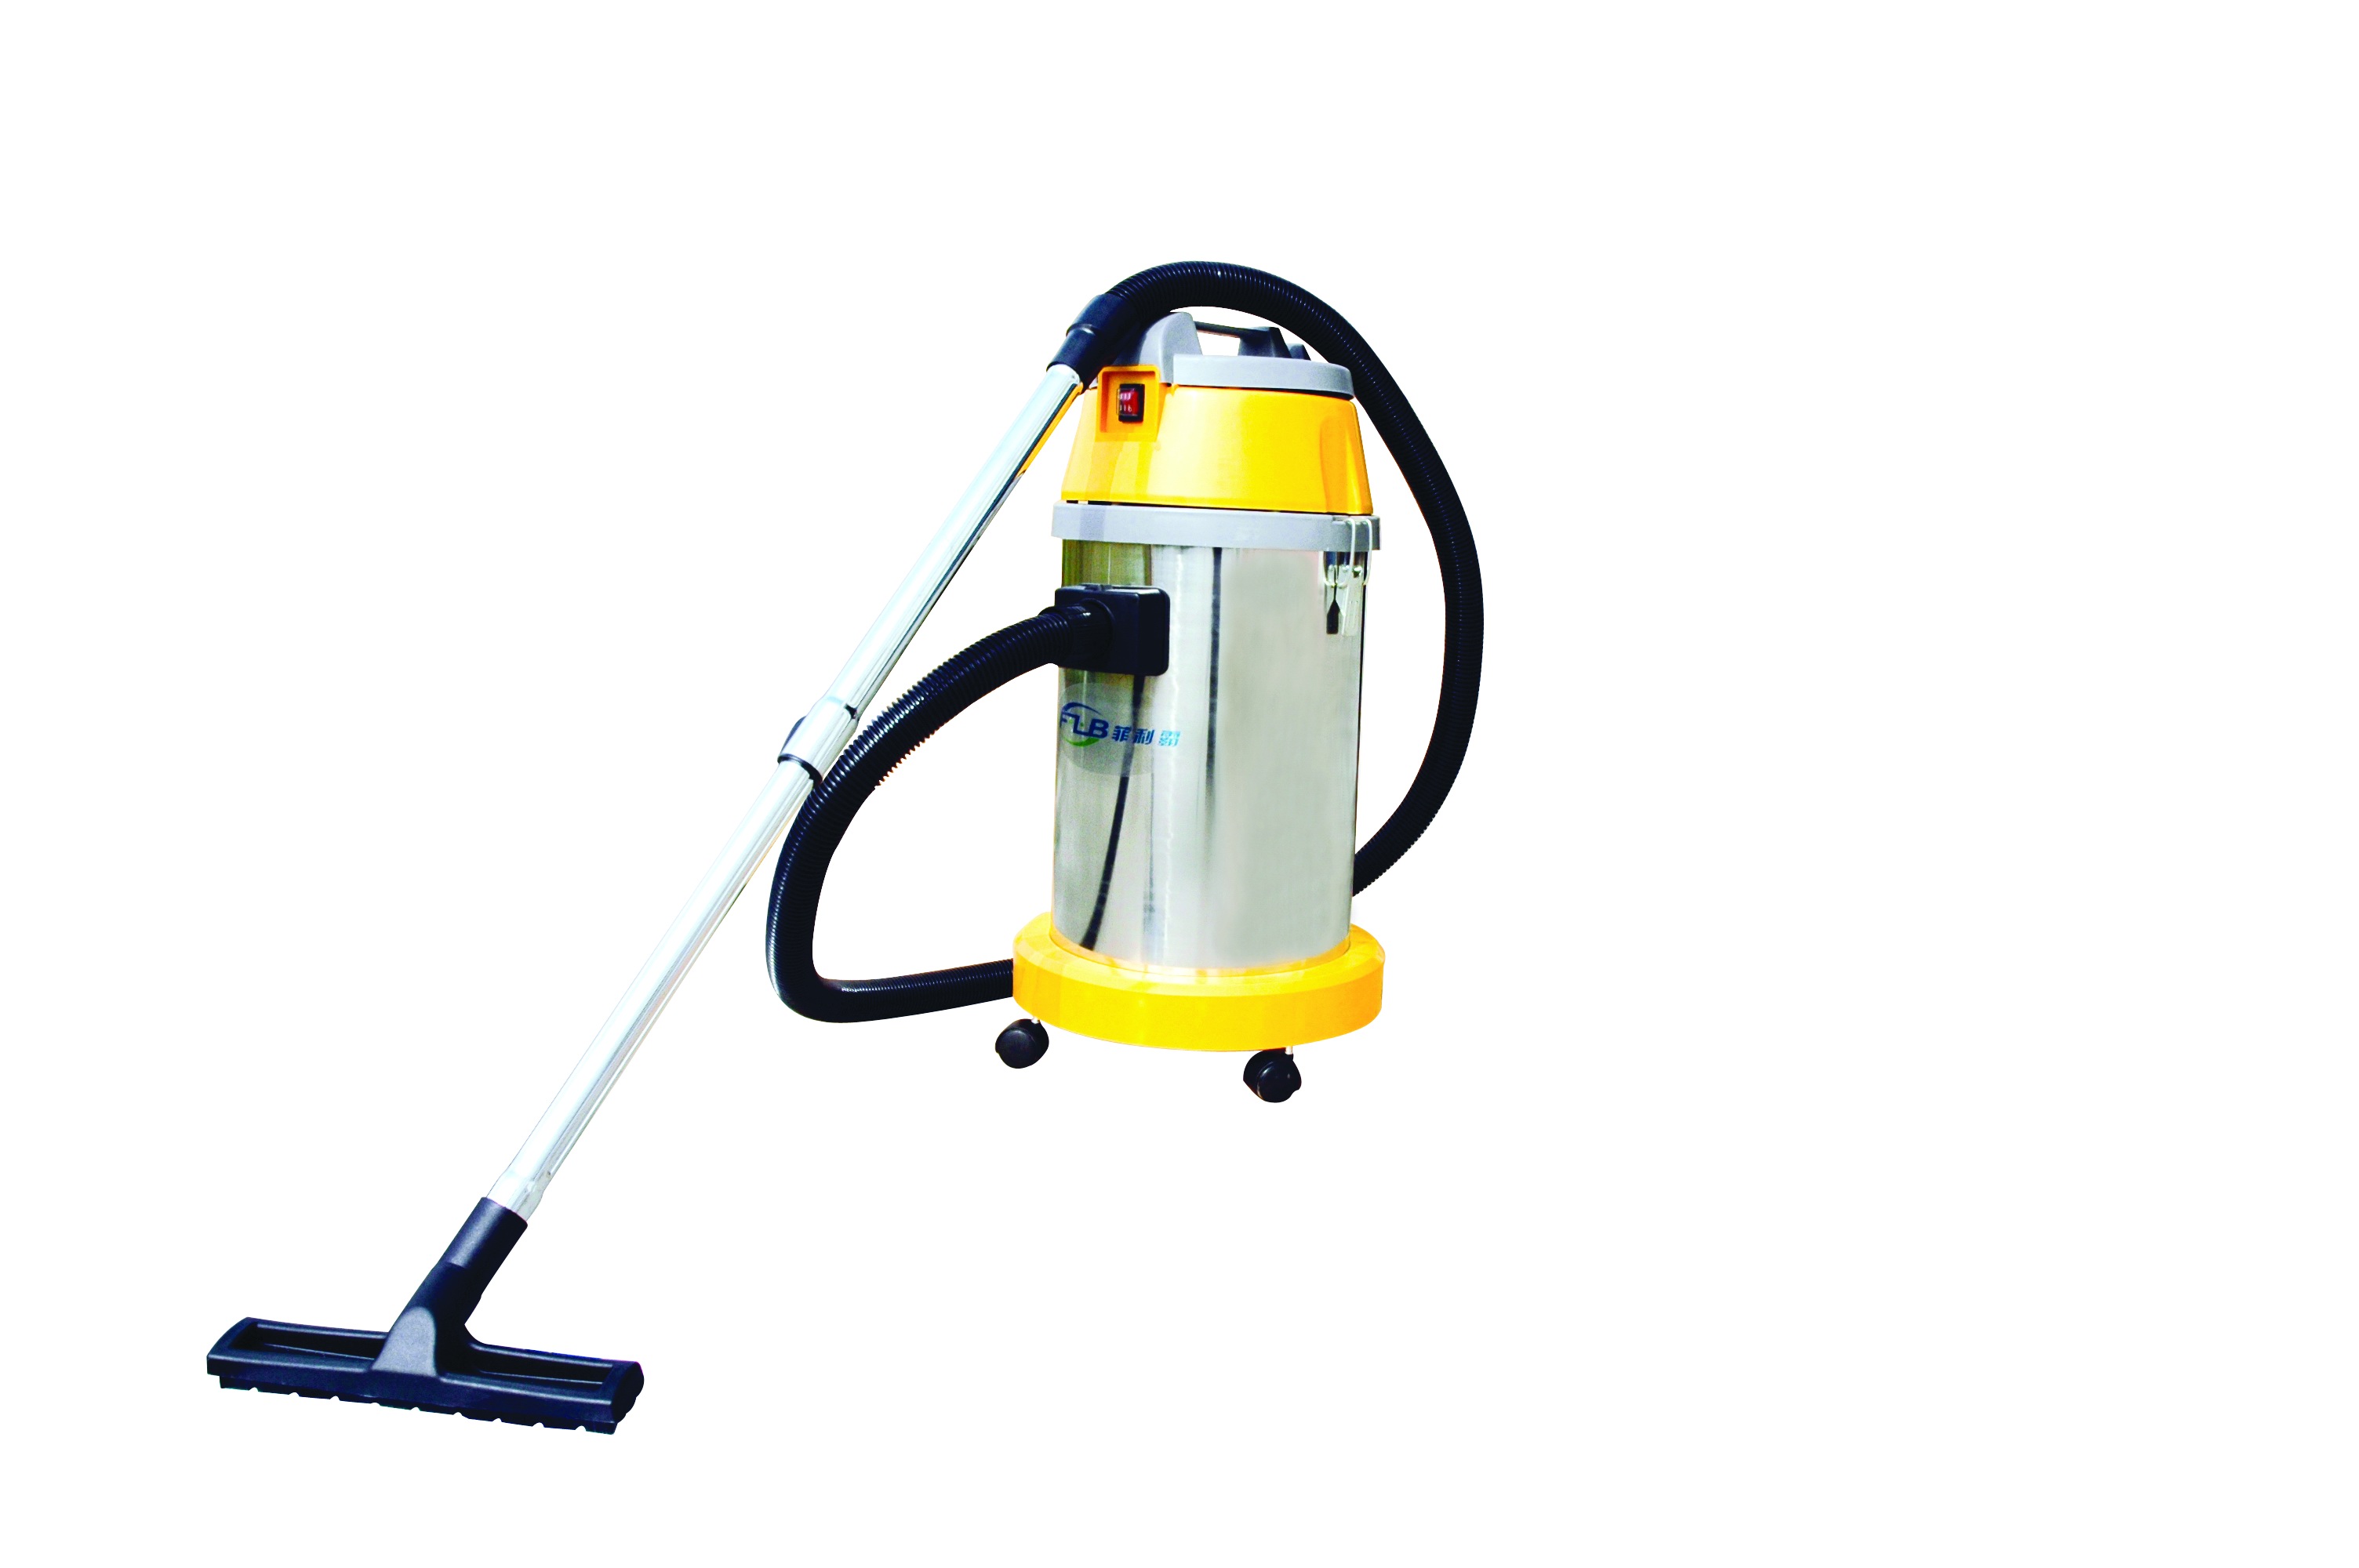 30L Wet And Dry Vacuum Cleaner